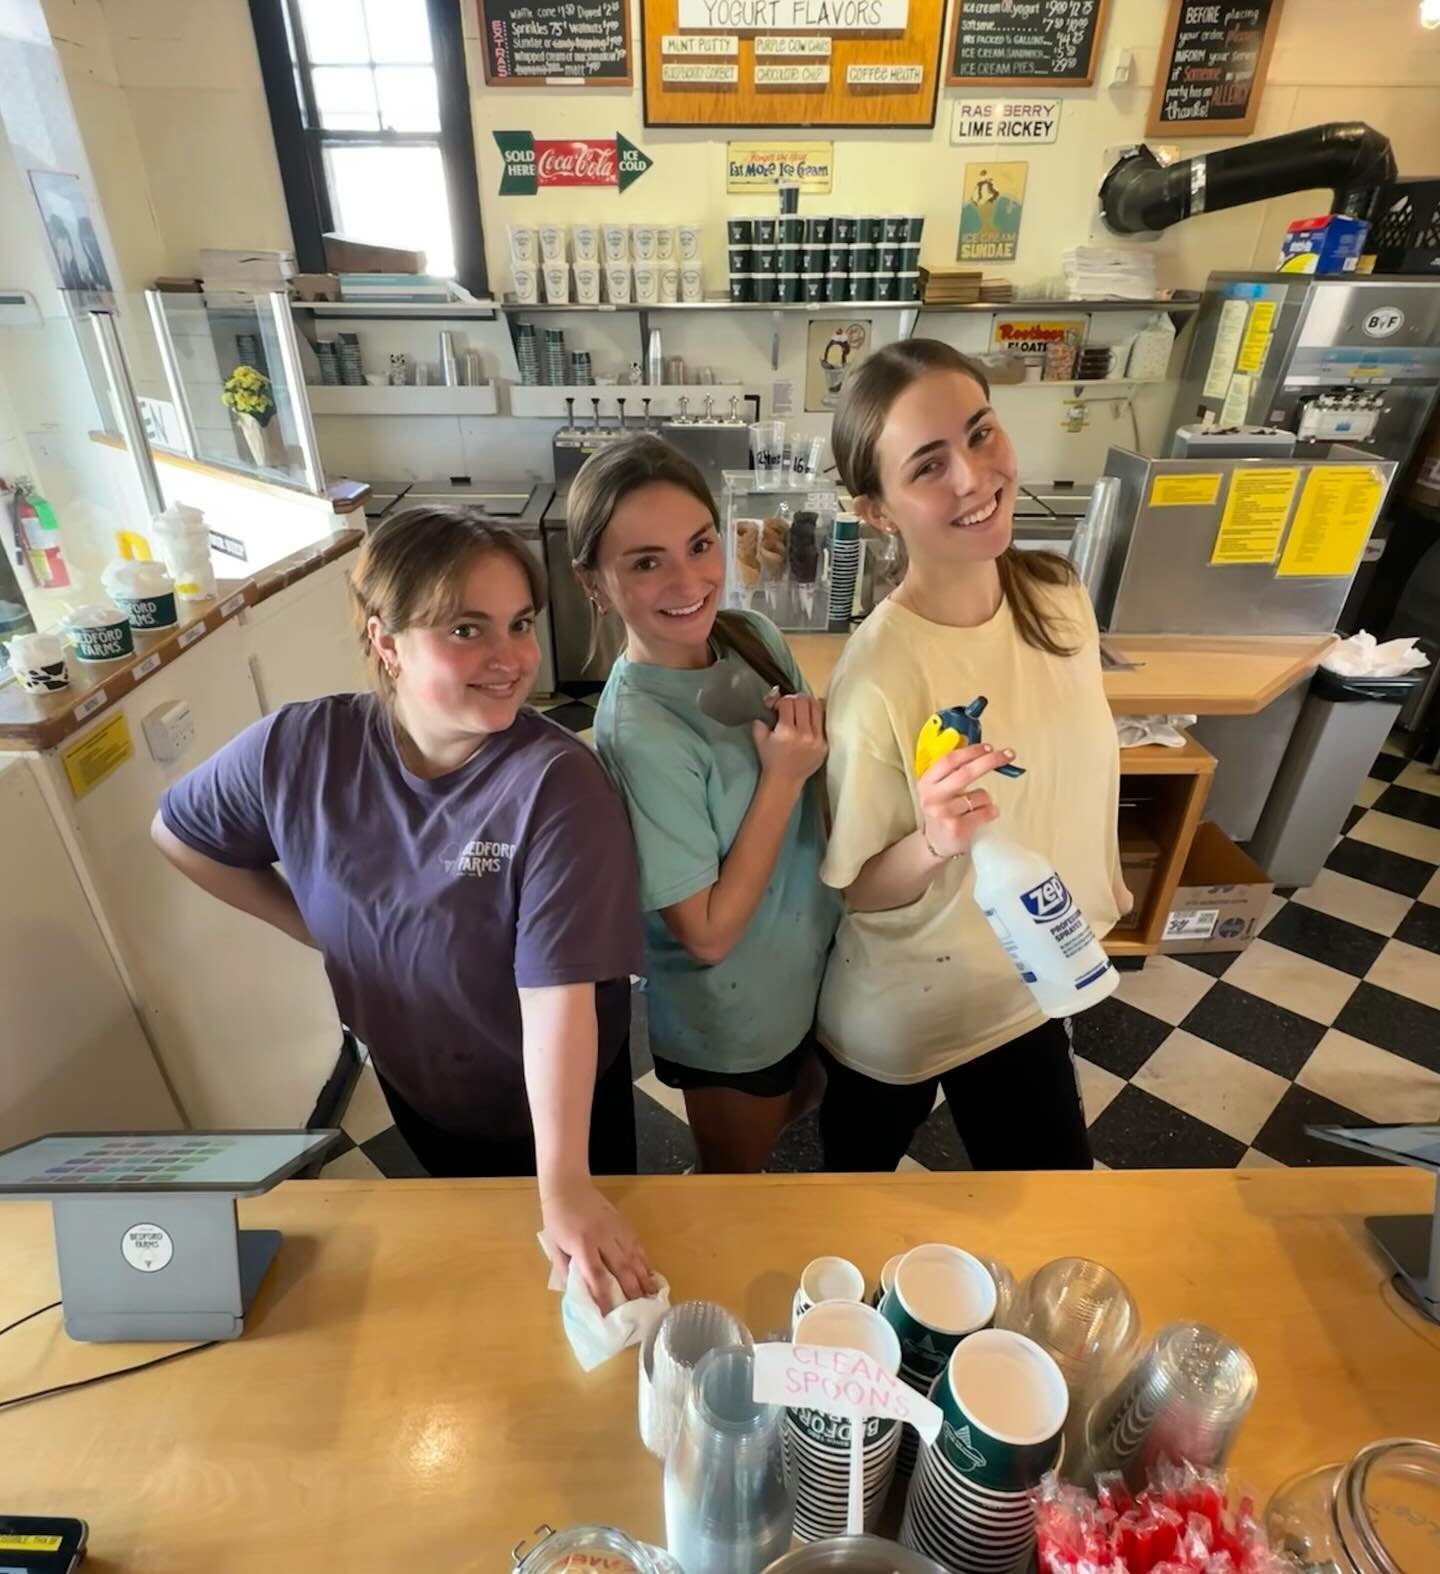 You know it&rsquo;s almost summer when the college crew is back behind the counter ✅ both shops now open 12-9pm everyday 🍦  #bedfordfarmsicecream #GDFIC